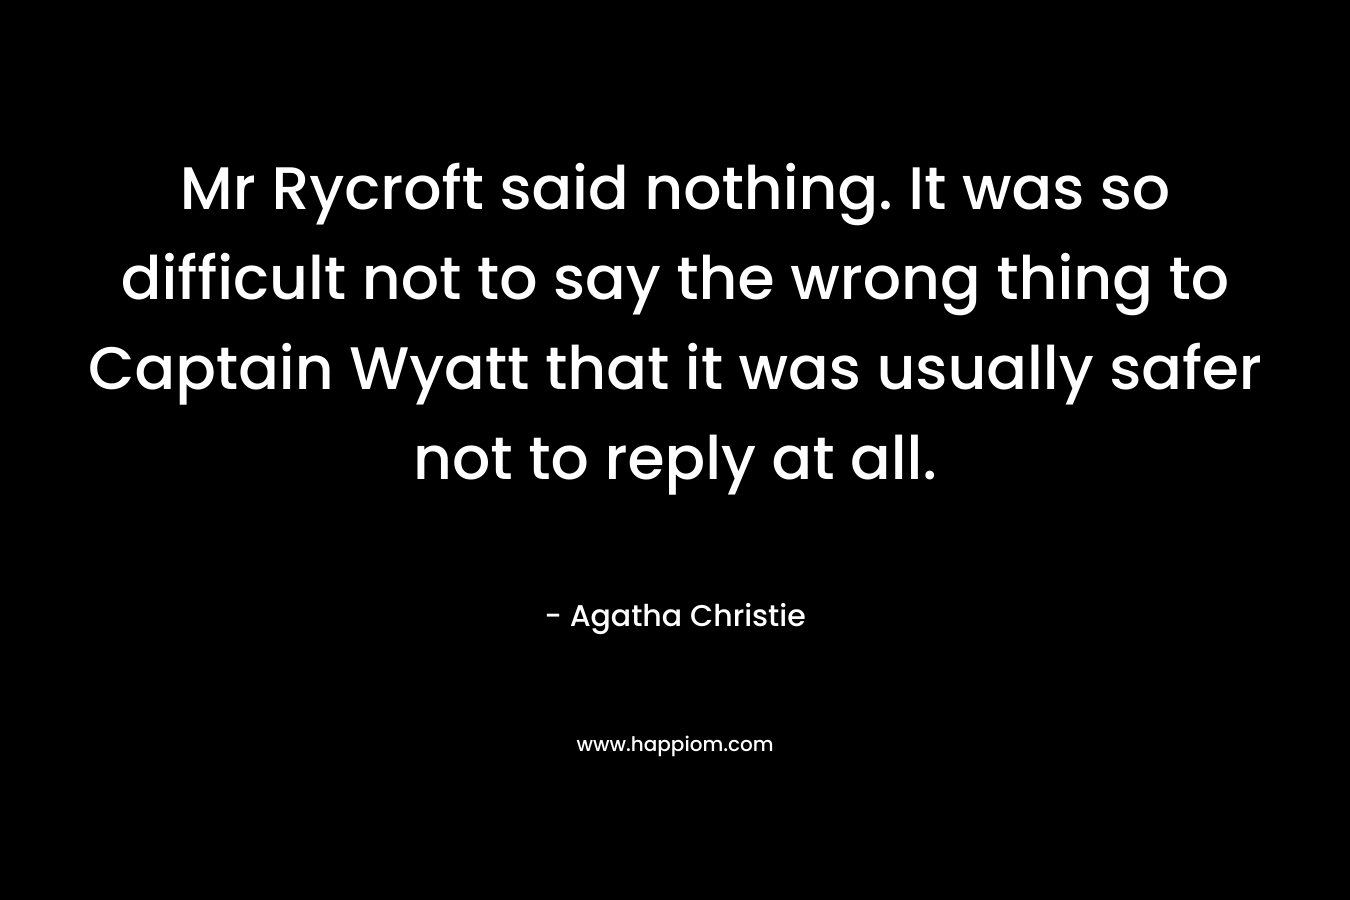 Mr Rycroft said nothing. It was so difficult not to say the wrong thing to Captain Wyatt that it was usually safer not to reply at all.